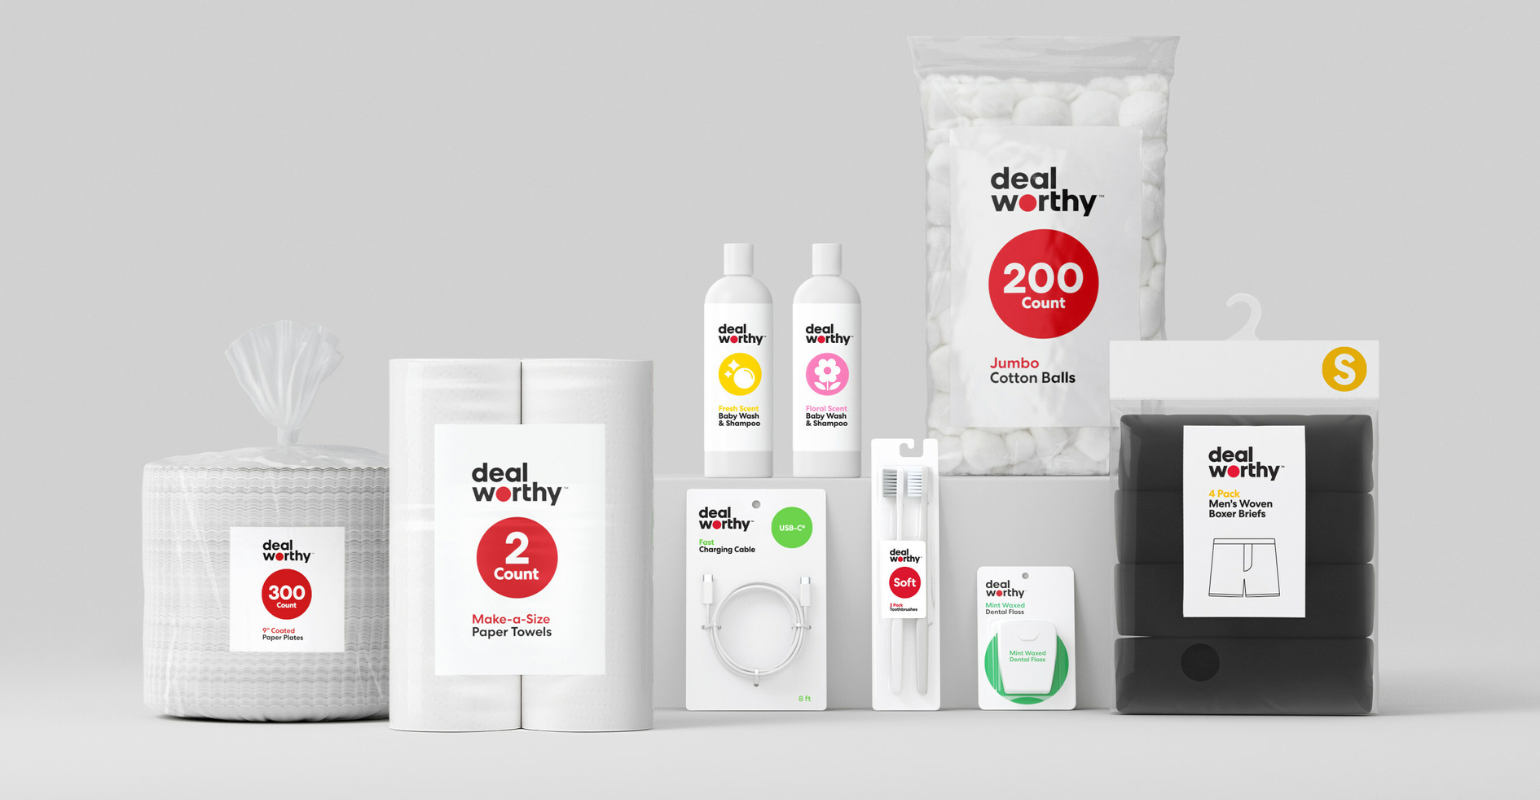 Target launches new private label brand, Dealworthy